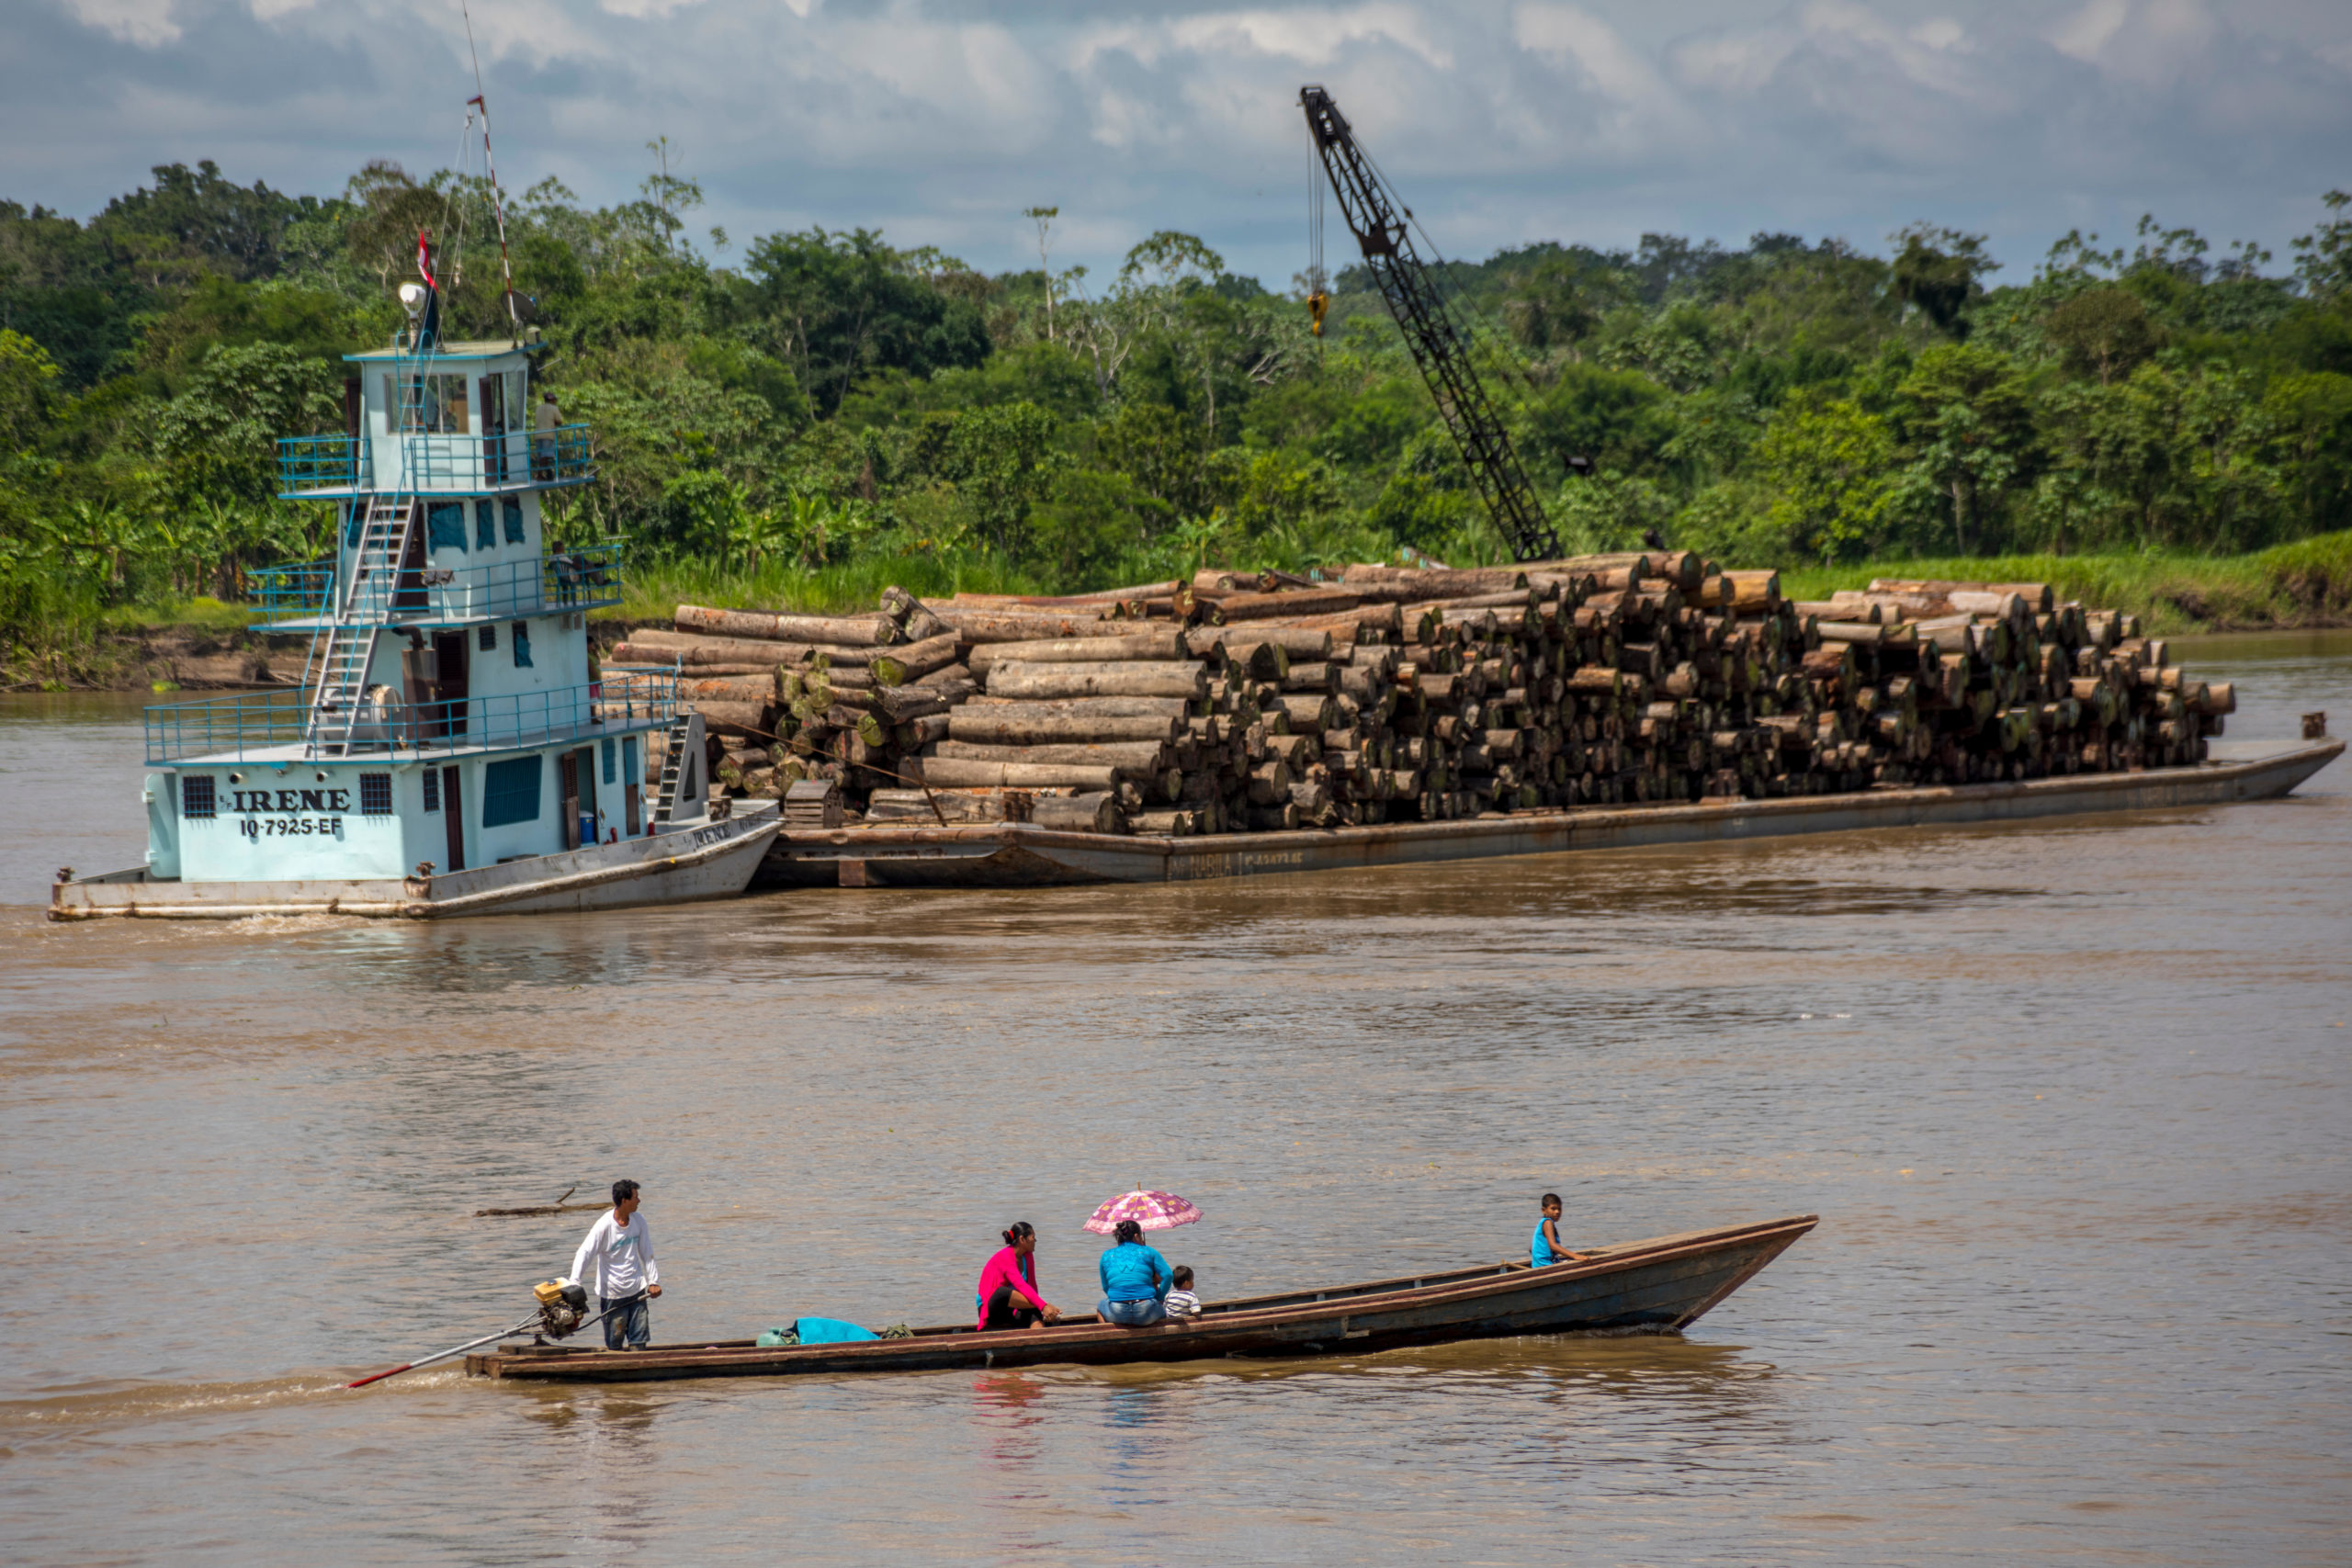 people in small boat watching larger vessel carting timber on river